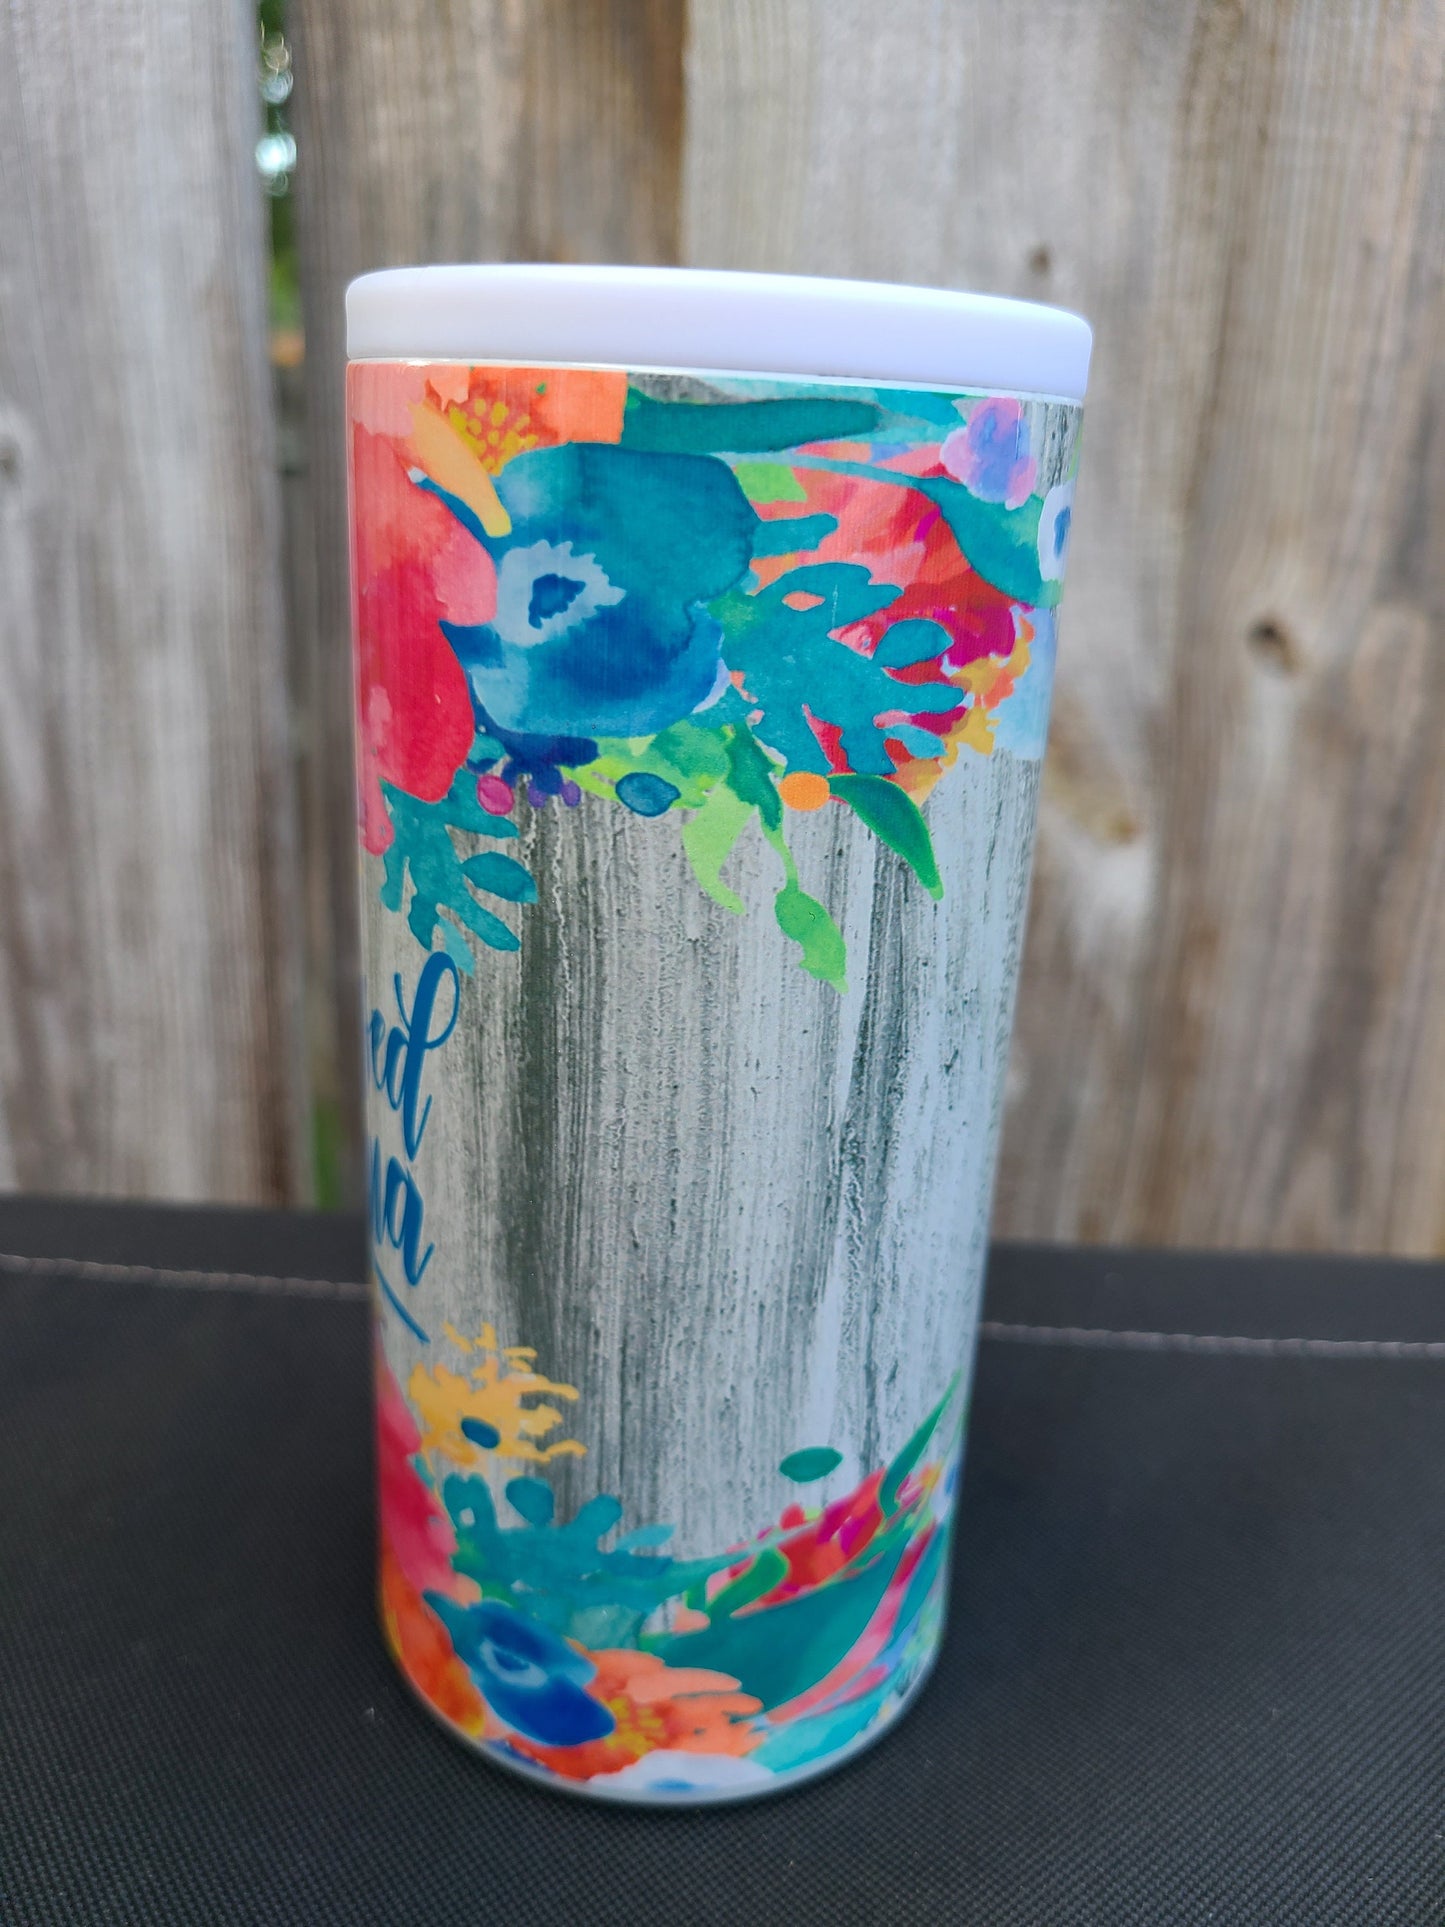 Blessed Mama Floral Skinny Can Cooler